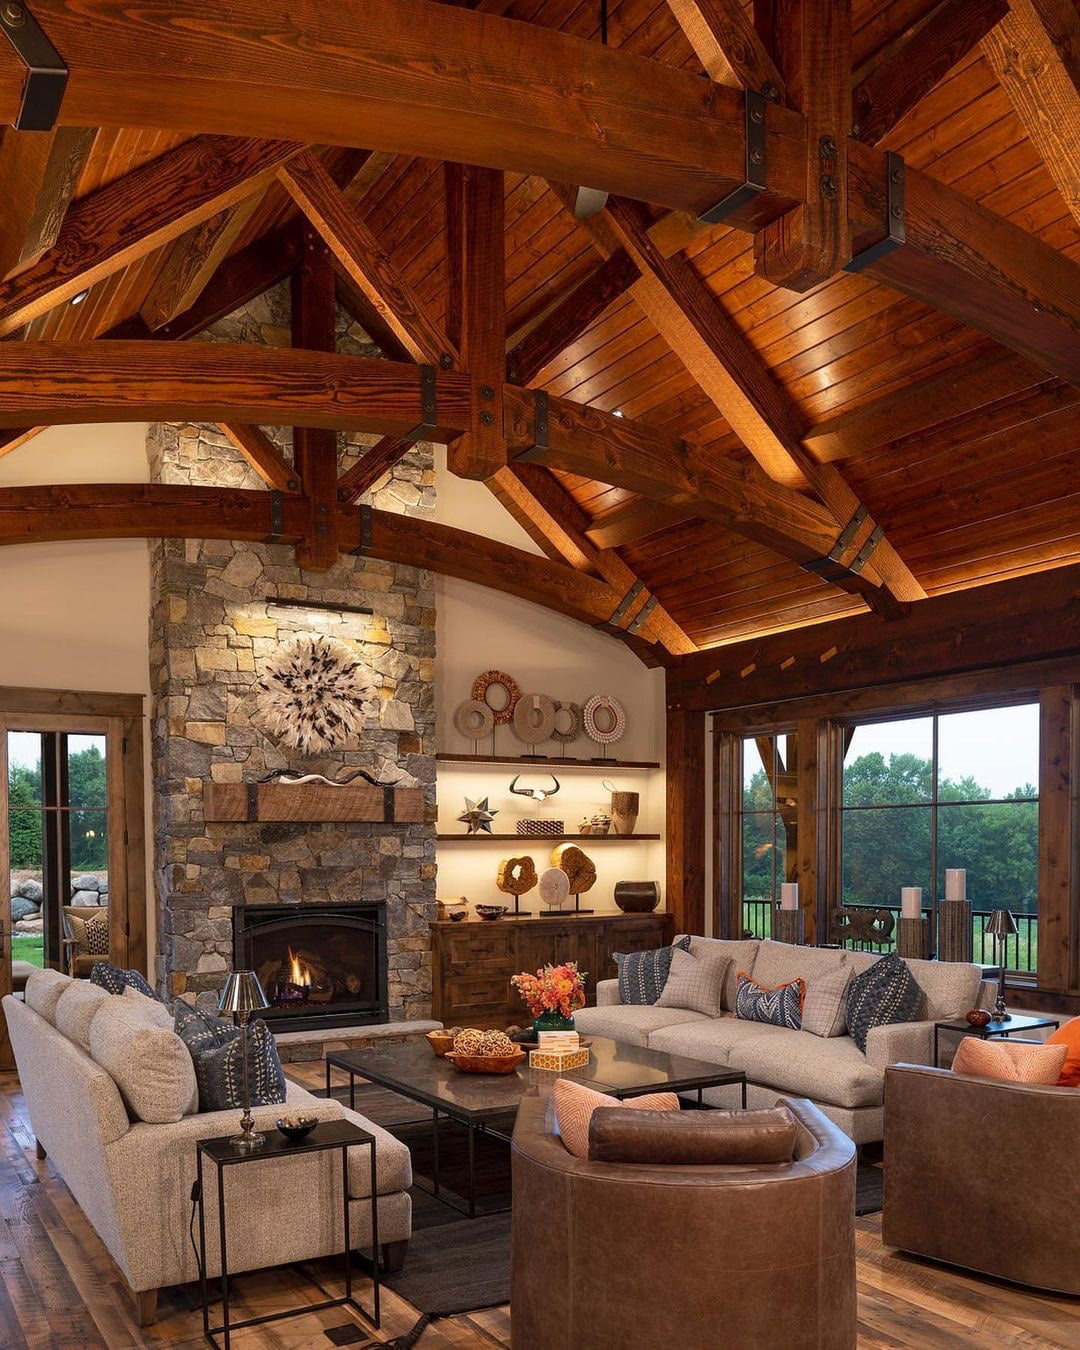 Wood windows and a patio door surround a cozy living room with wood beams and a stone fireplace.